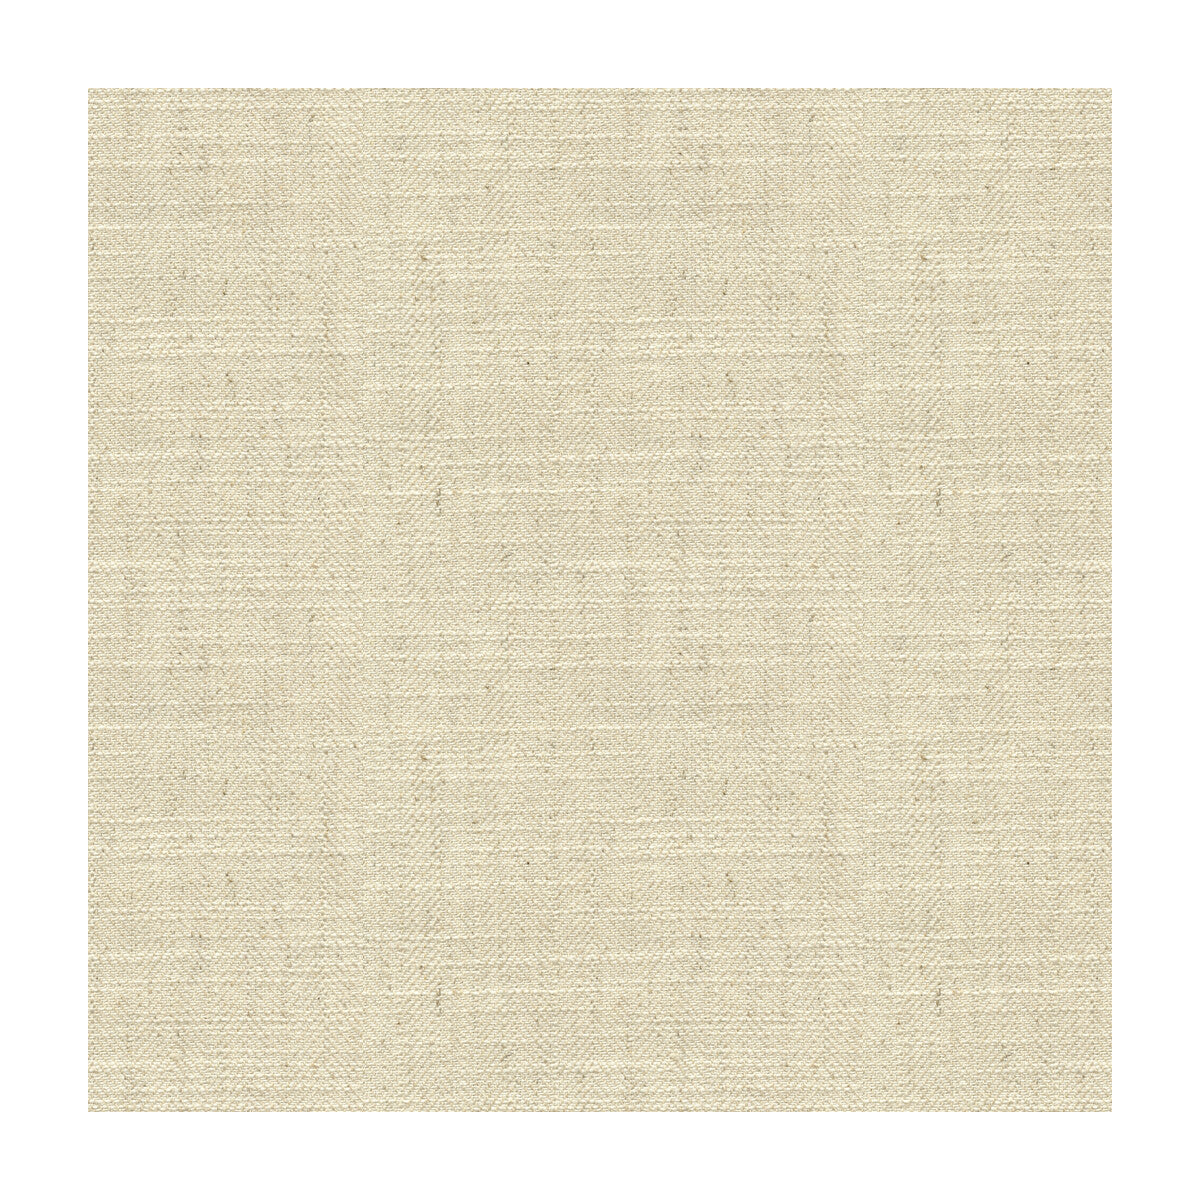 Kravet Basics fabric in 33842-111 color - pattern 33842.111.0 - by Kravet Basics in the Perfect Plains collection